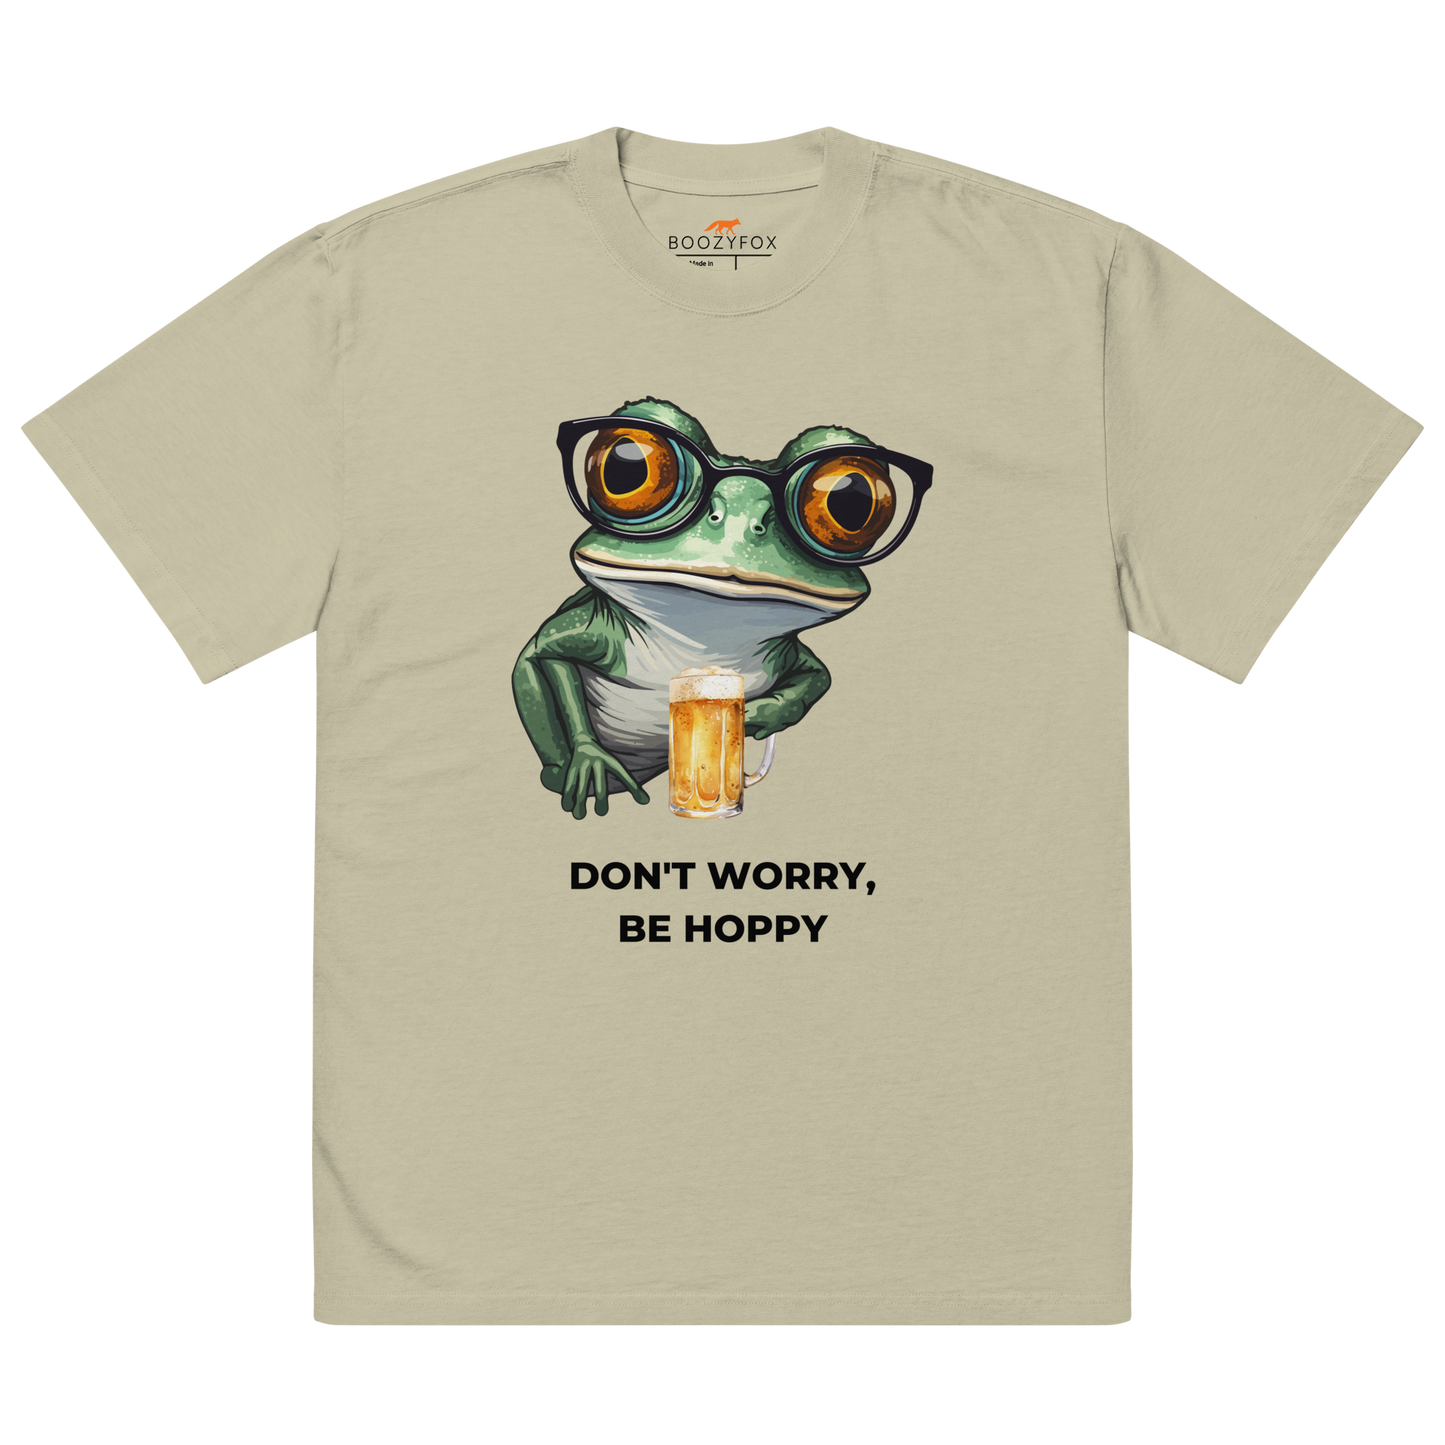 Faded Eucalyptus Frog Oversized T-Shirt featuring a ribbitting Don't Worry, Be Hoppy graphic on the chest - Funny Graphic Frog Oversized Tees - Boozy Fox